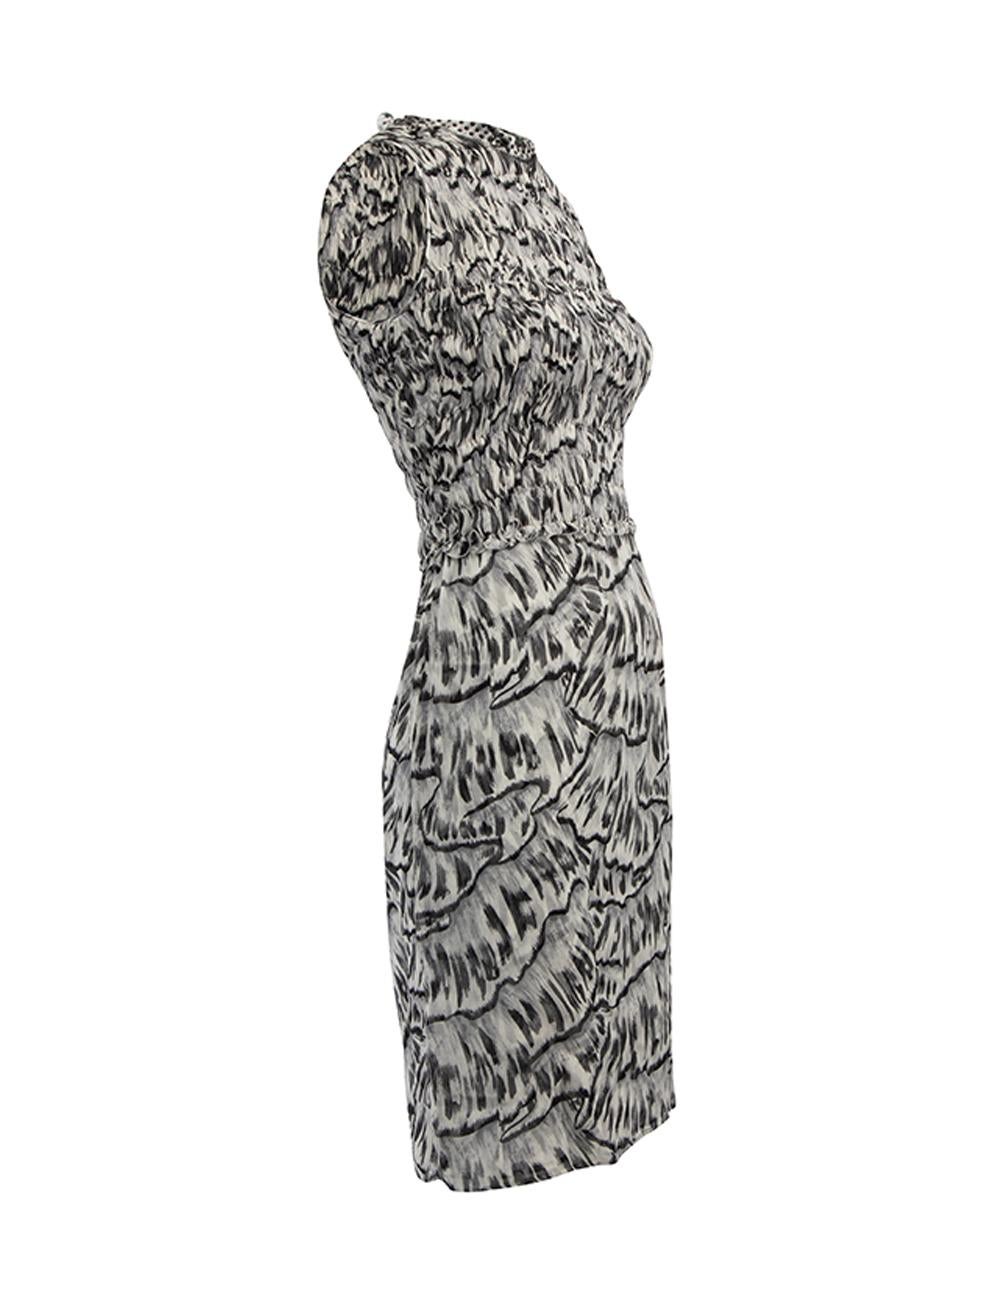 CONDITION is Very good. Hardly any visible wear to dress is evident on this used Bottega Veneta designer resale item. Details Black and white Silk Abstract pattern Ruched bodice Black studded neckline Round neck Sleeveless Back zip and clasp